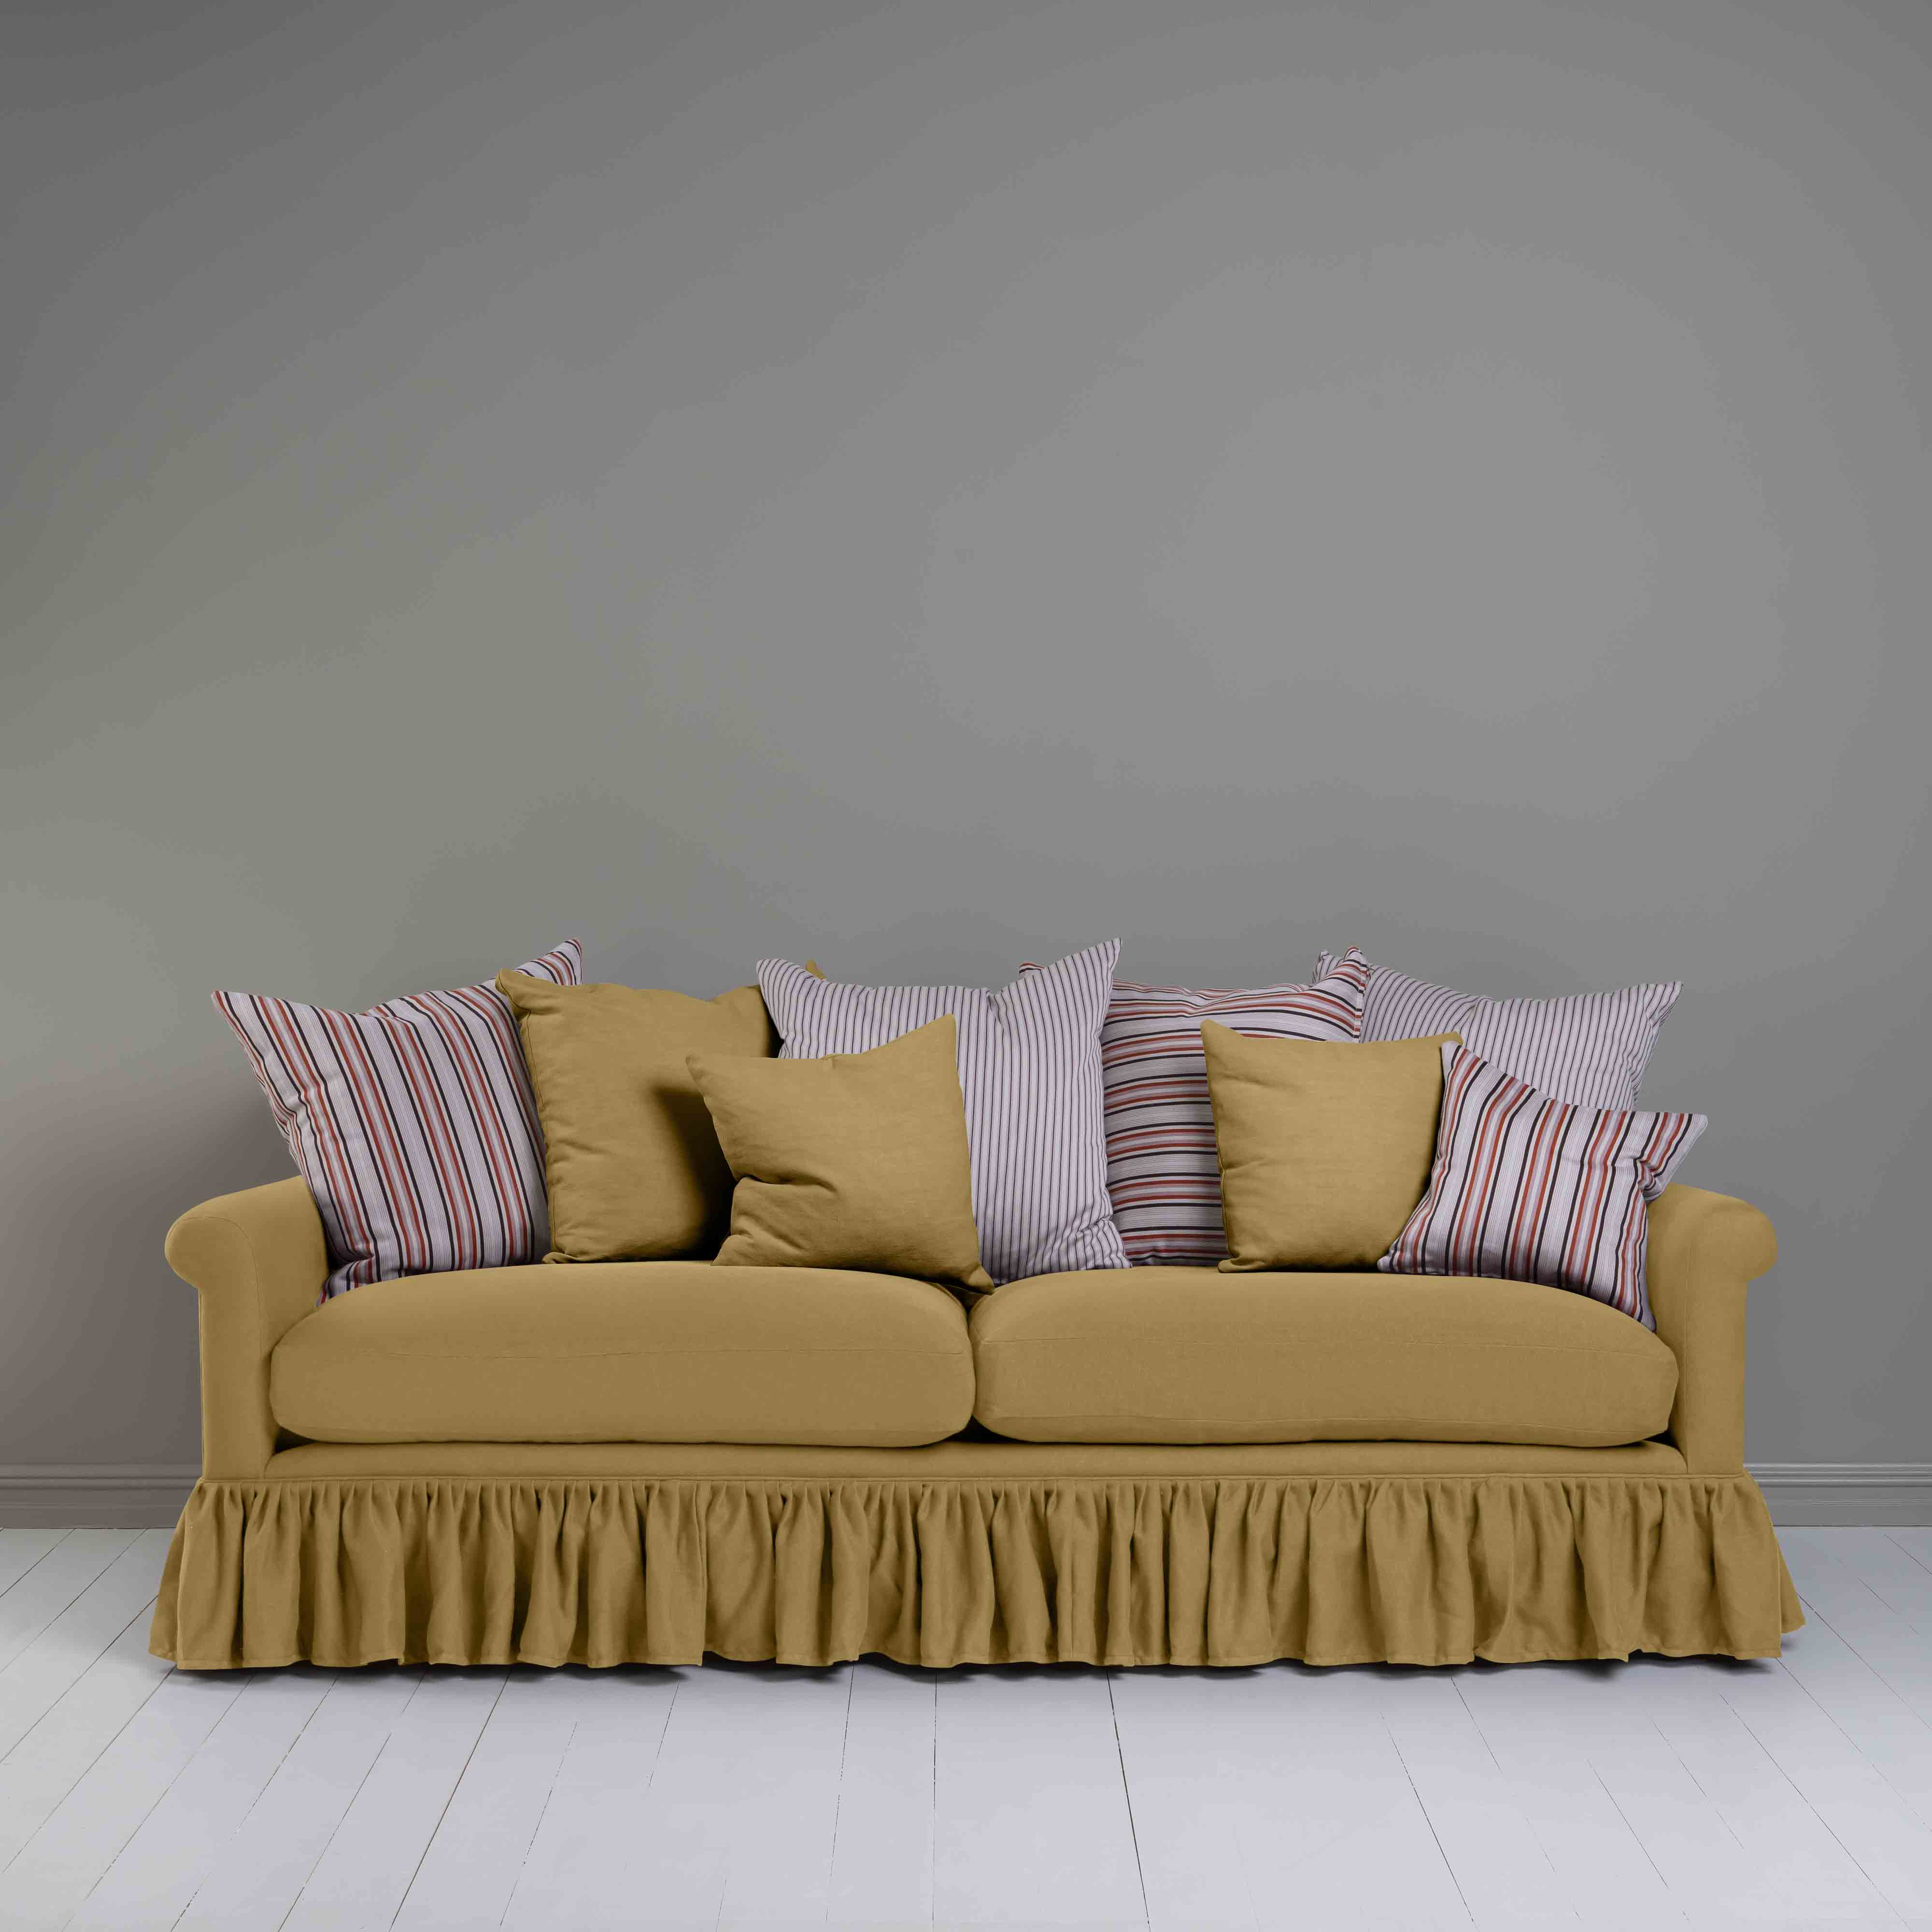  Curtain Call 4 Seater Sofa in Laidback Linen Ochre 